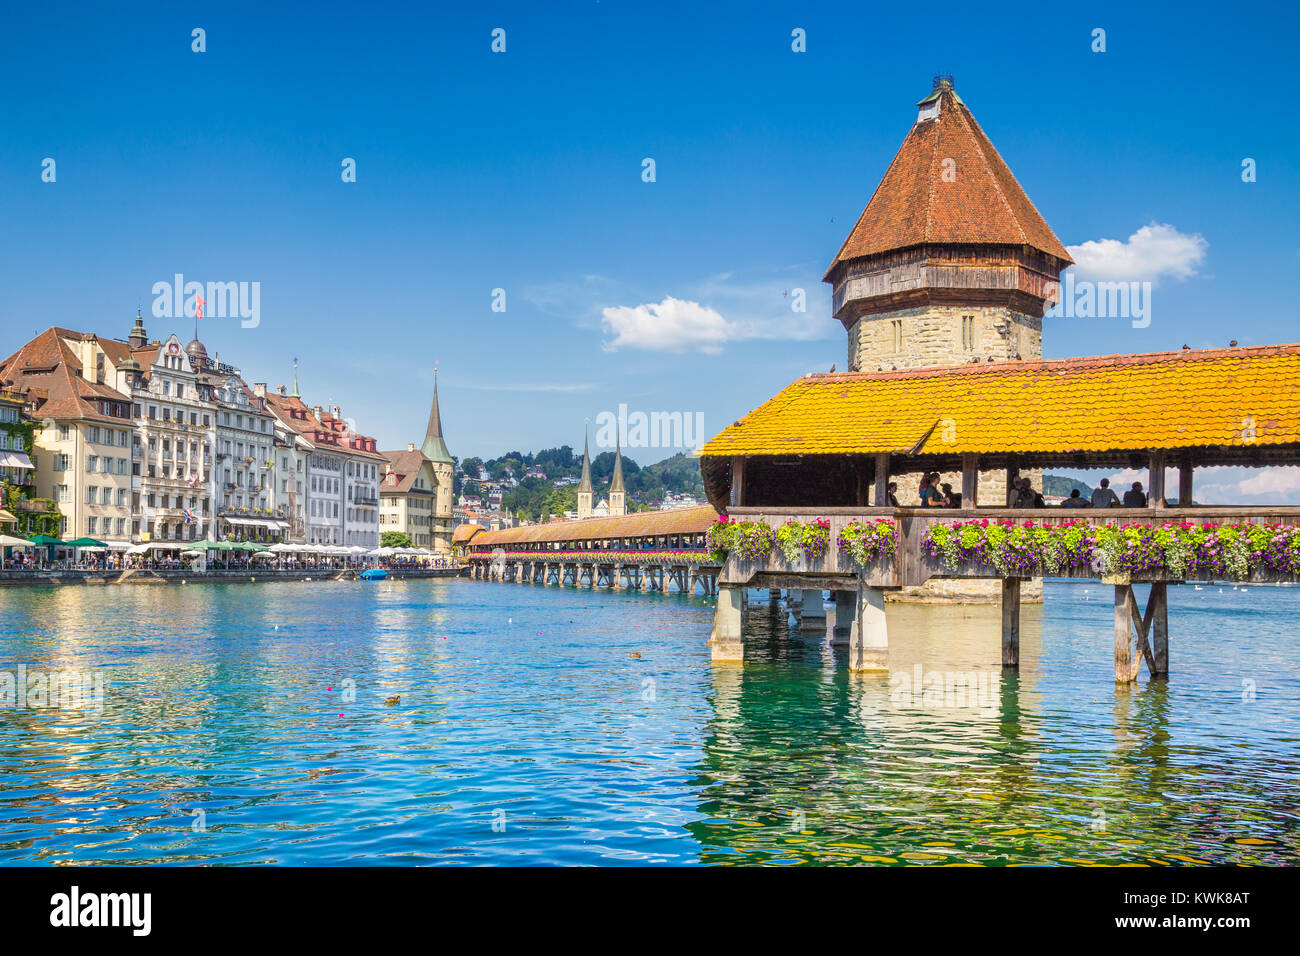 Historic city center of Lucerne with famous Chapel Bridge, the city's symbol and one of the Switzerland's main tourist attractions in summer Stock Photo